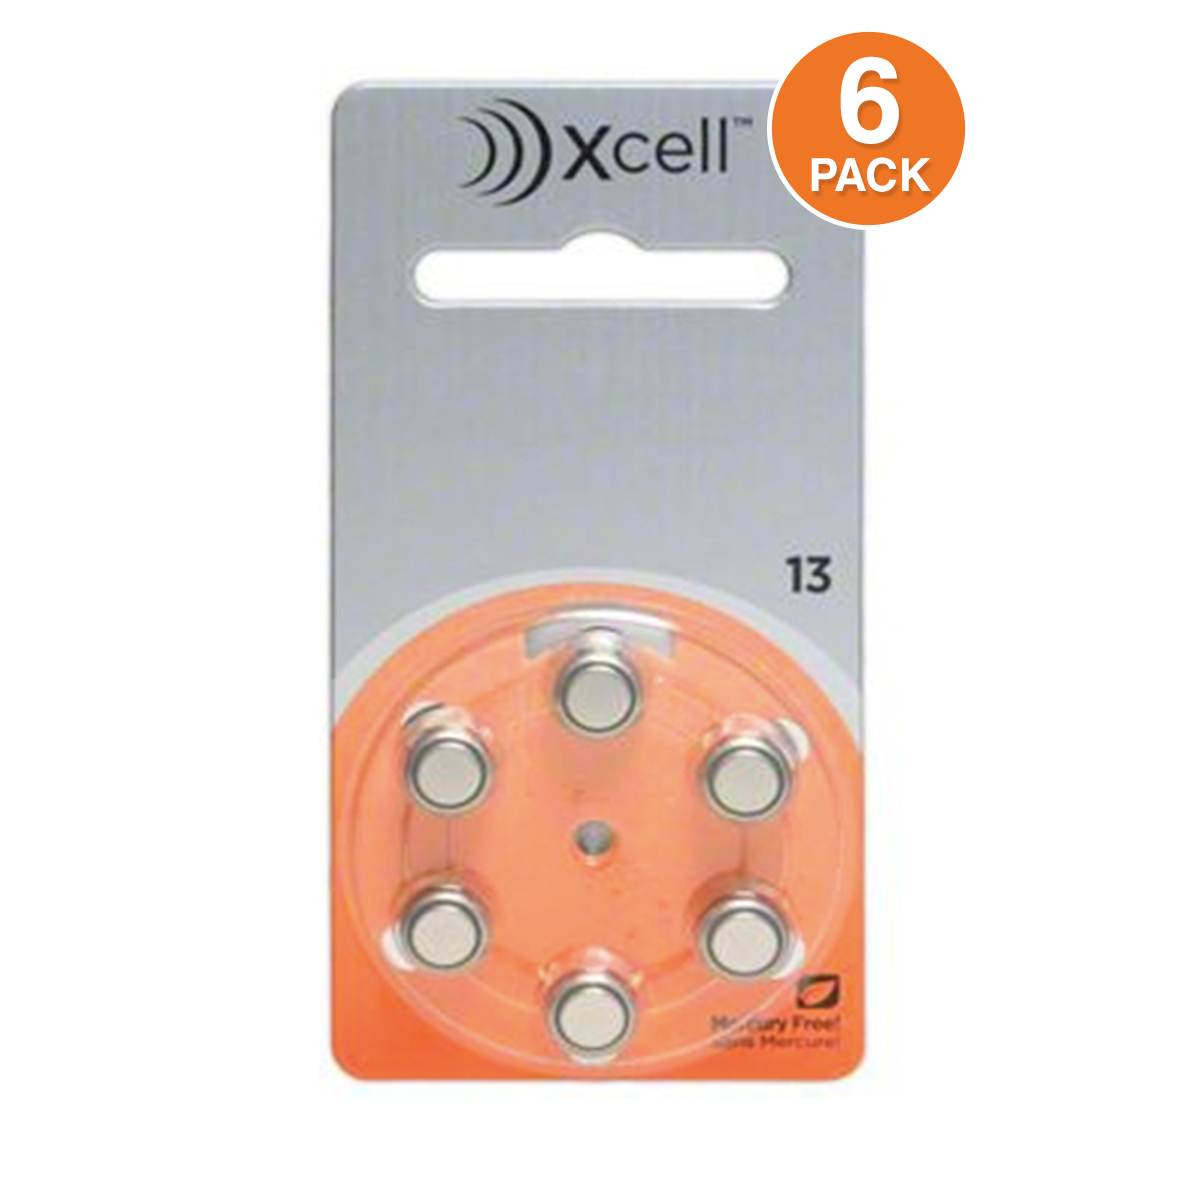 Xcell (Made by Rayovac) Hearing Aid Batteries, Size 13, MERCURY FREE (6 Pcs)